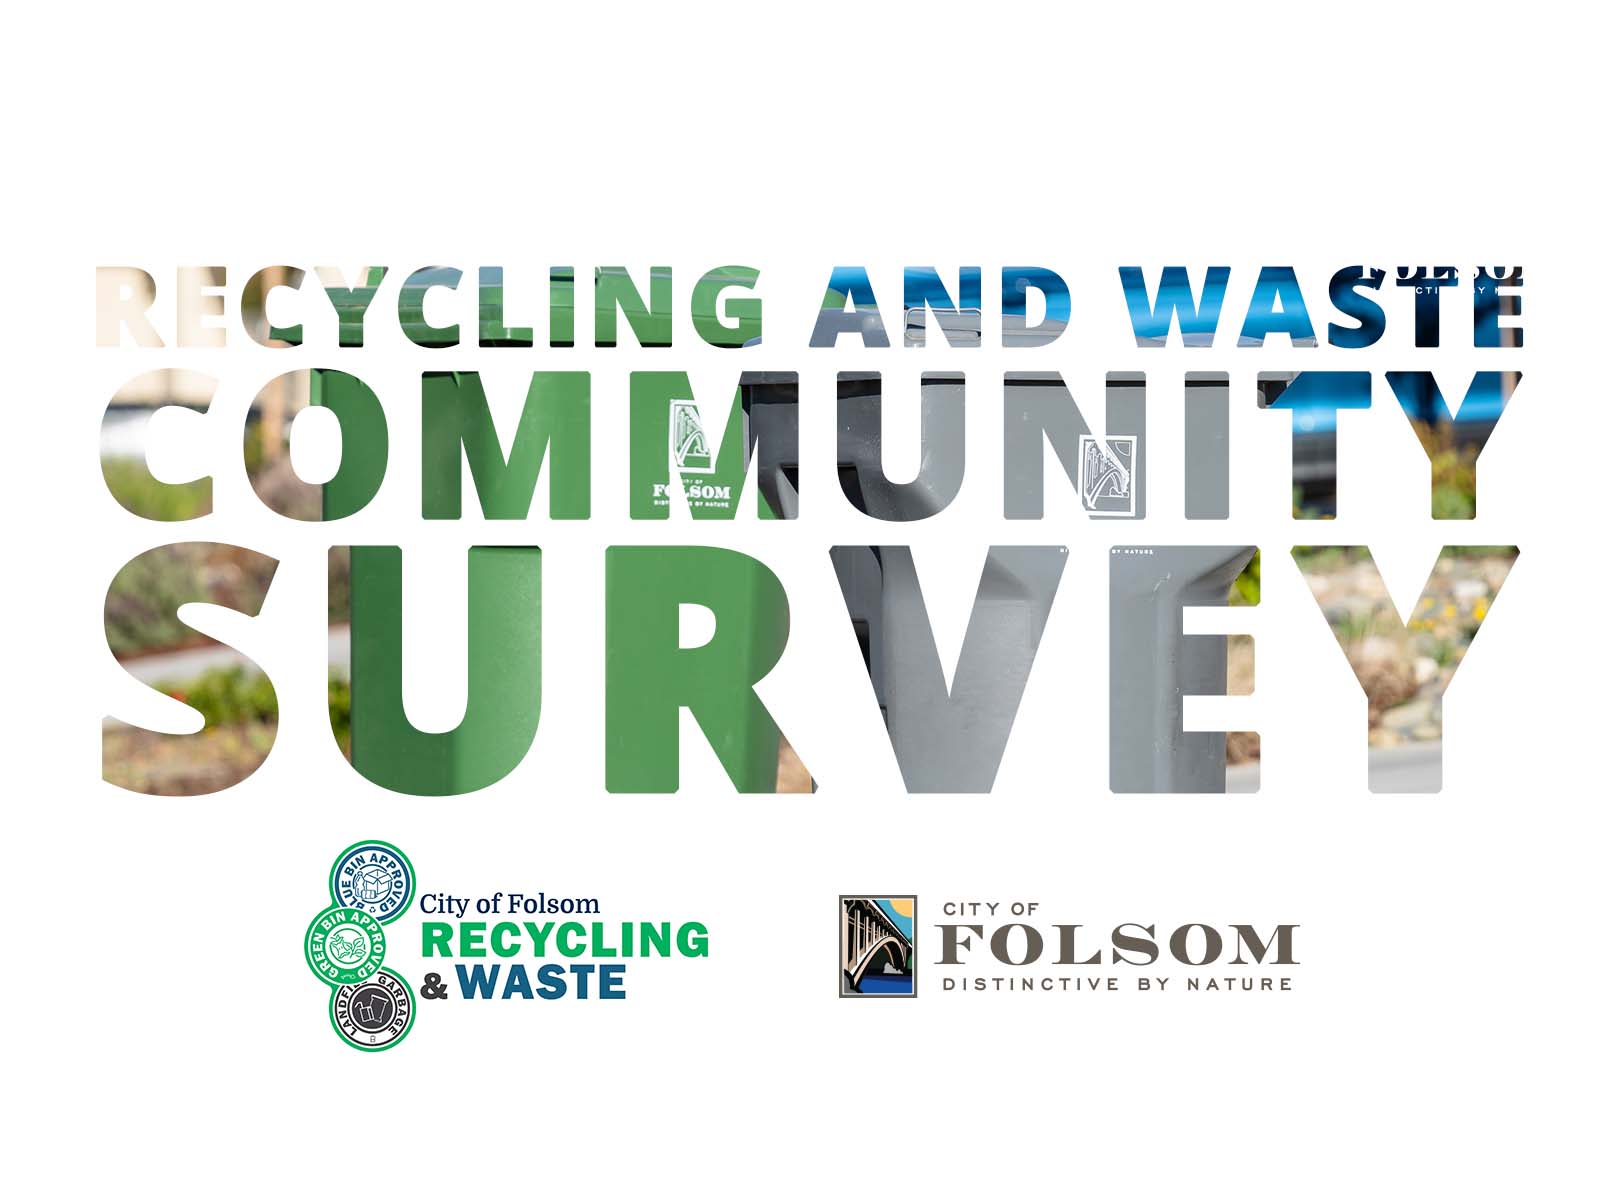 recycling and waste community survey graphic on a white background and waste bins image behind the overlay with the city of folsom city and recycling and waste logos at the bottom